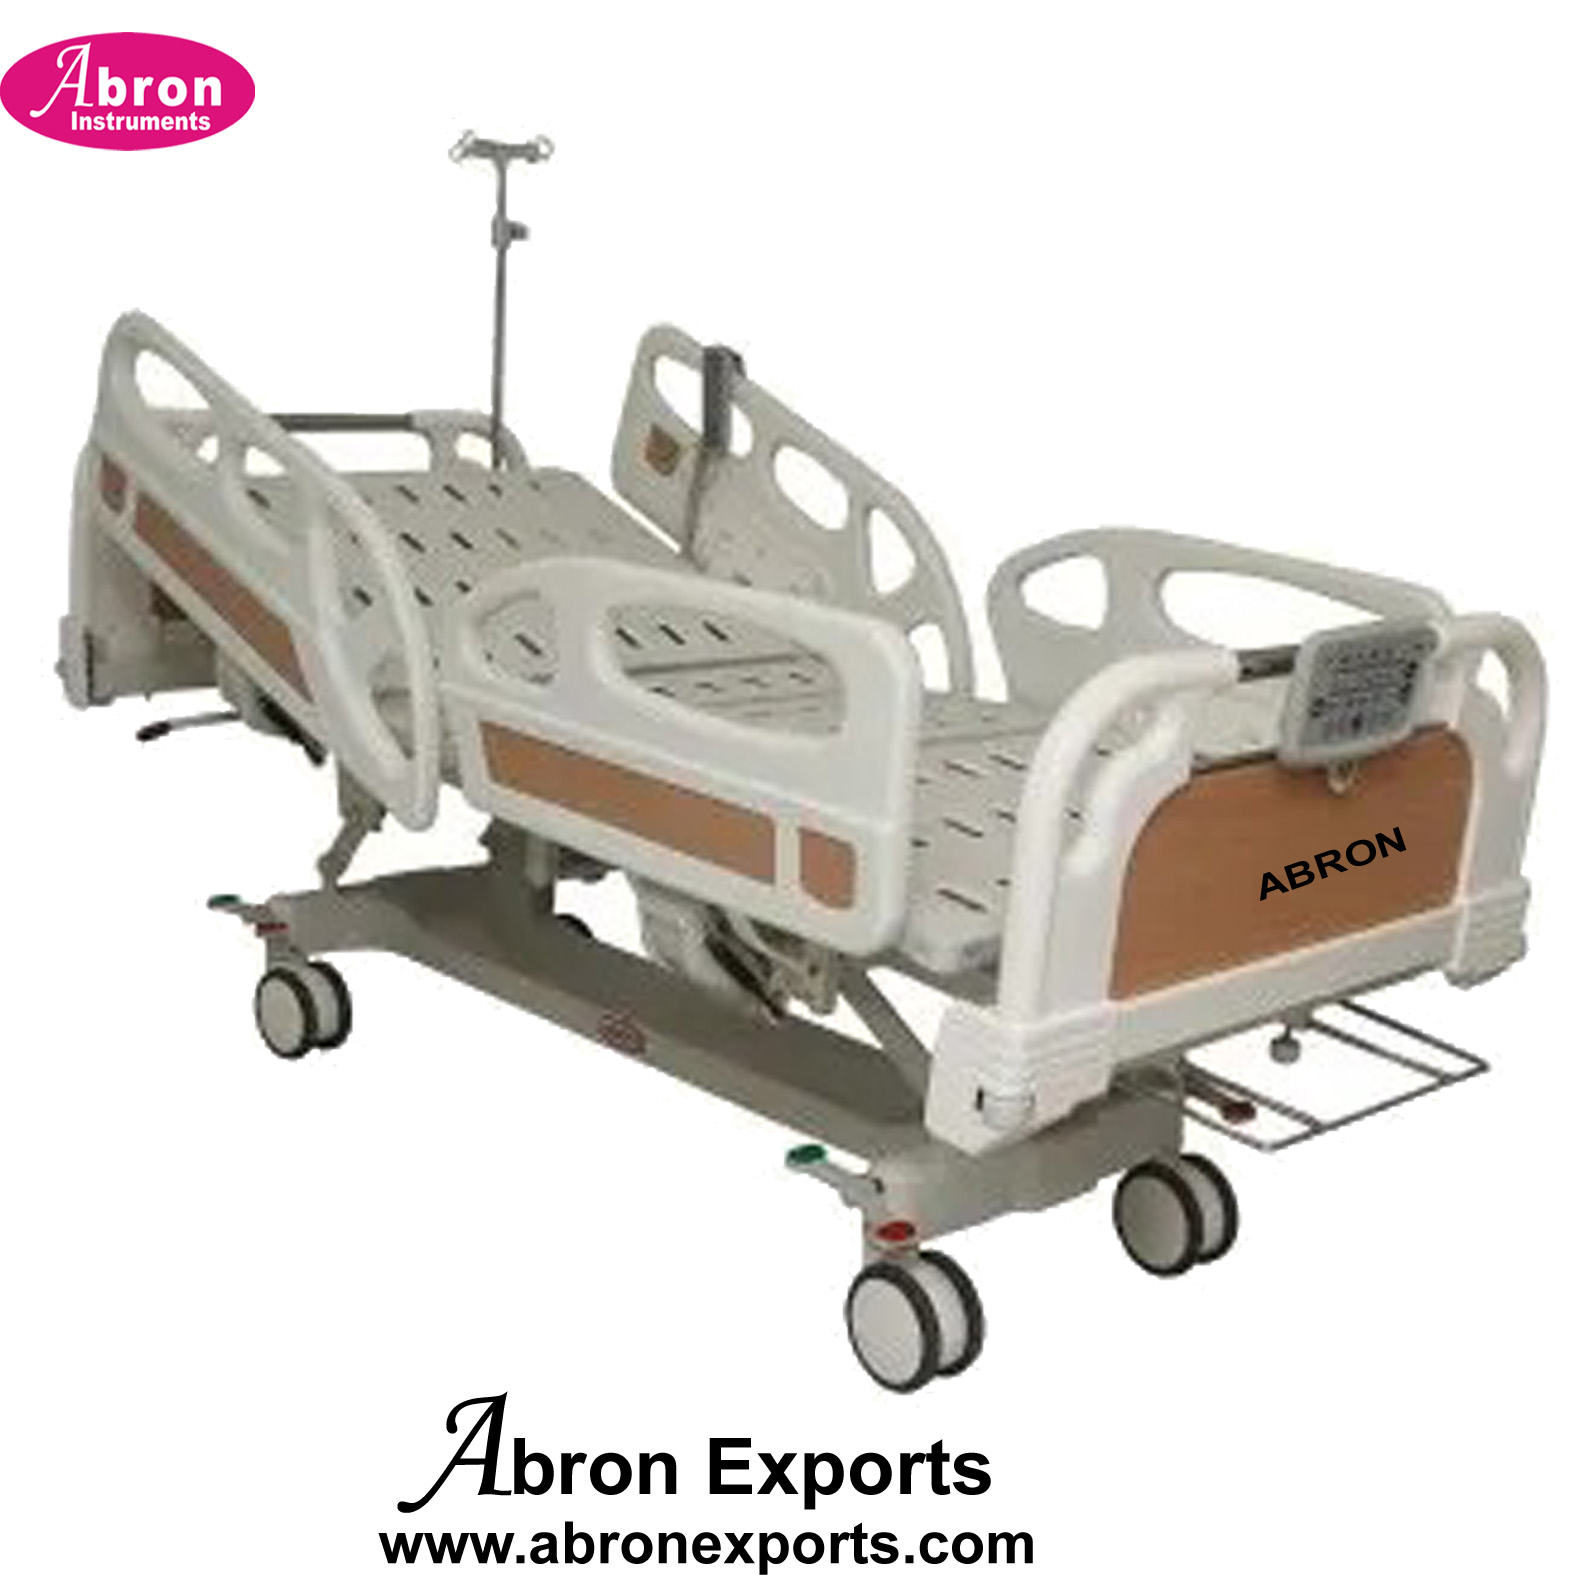 Paitent Stretcher Electric with Fowler Bed Oxygen O2 holder IV stand 2 function 4 Wheel U84 Abron ABM-2261SEIV2